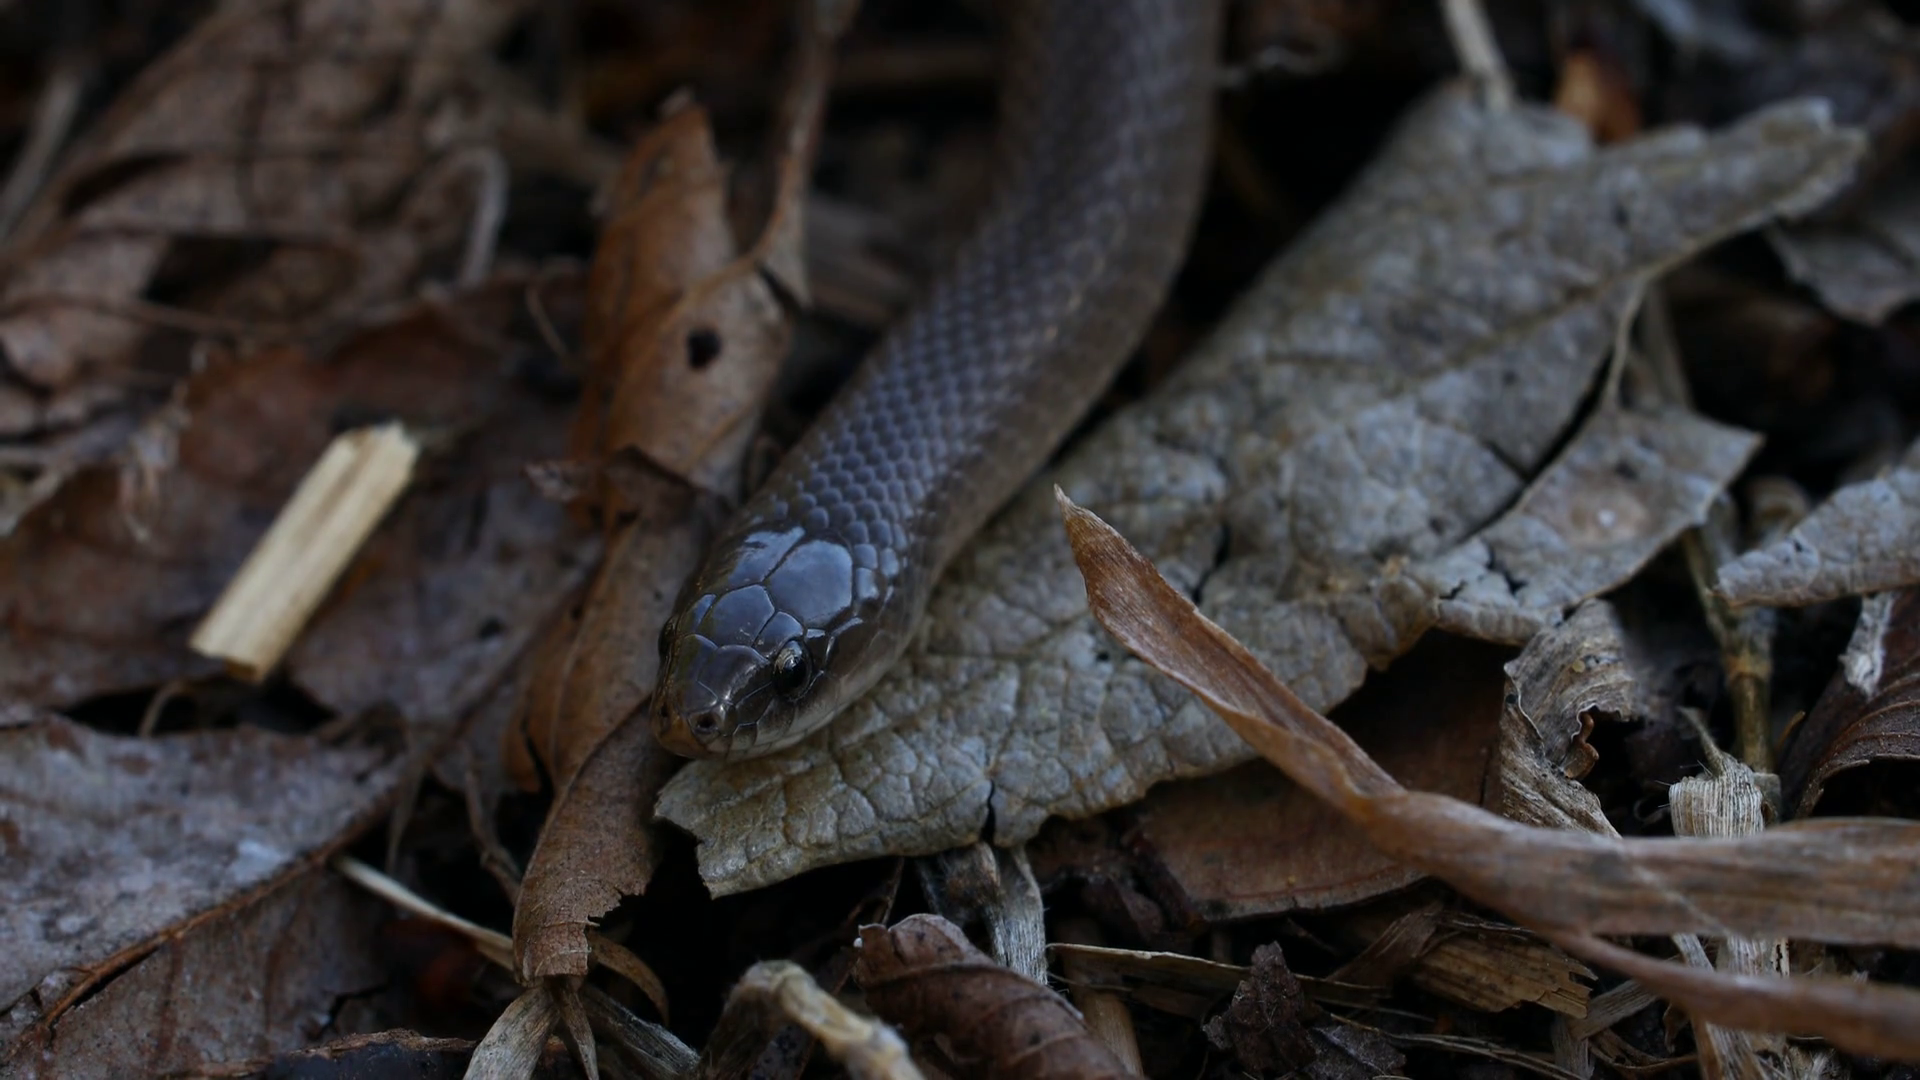 Earthsnake macro video. This was shot in North Texas. These small ...